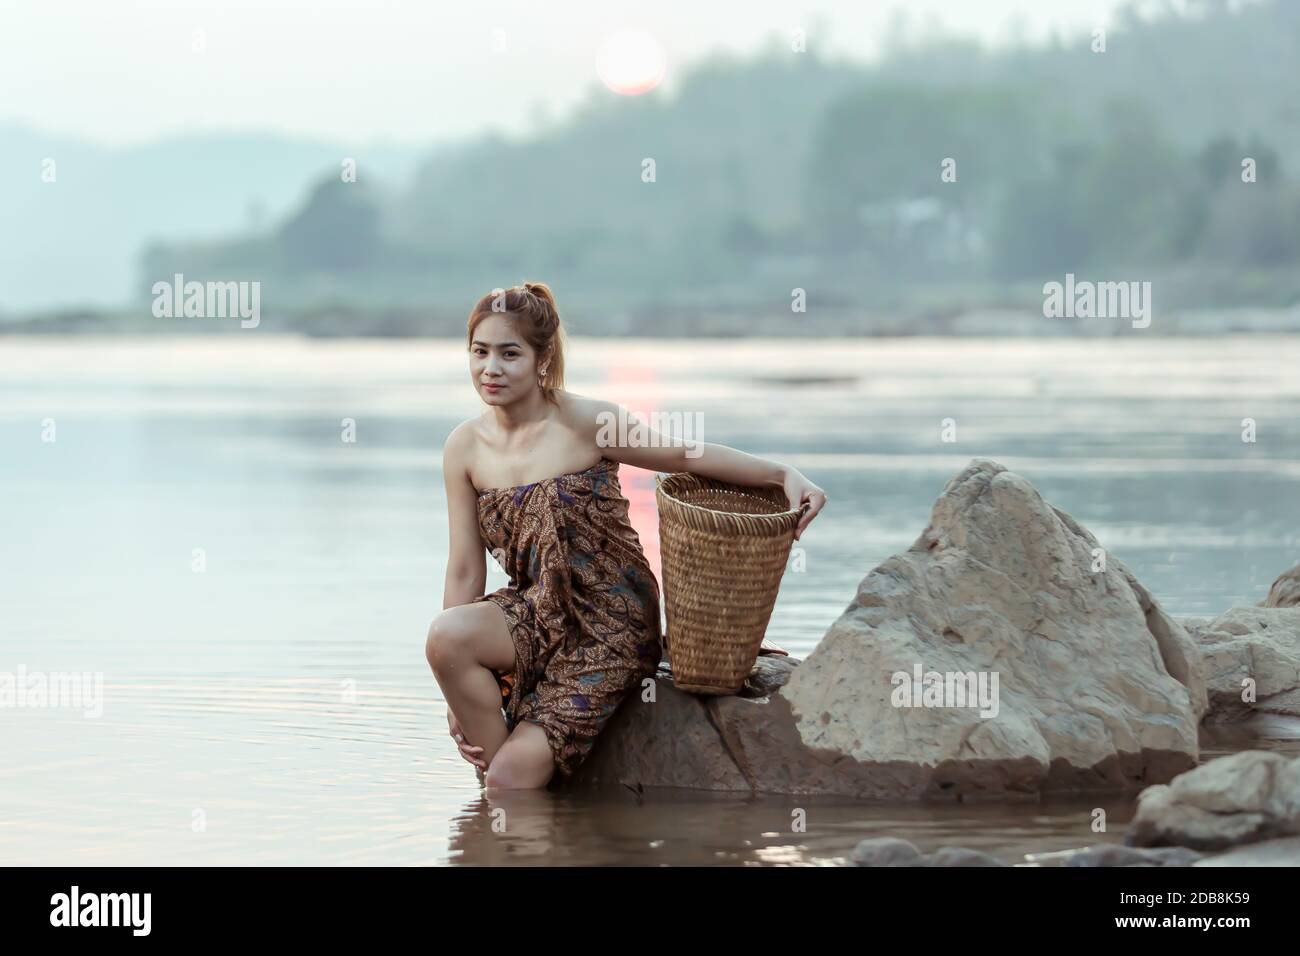 Woman sitting on a rock by a river, Thailand Stock Photo